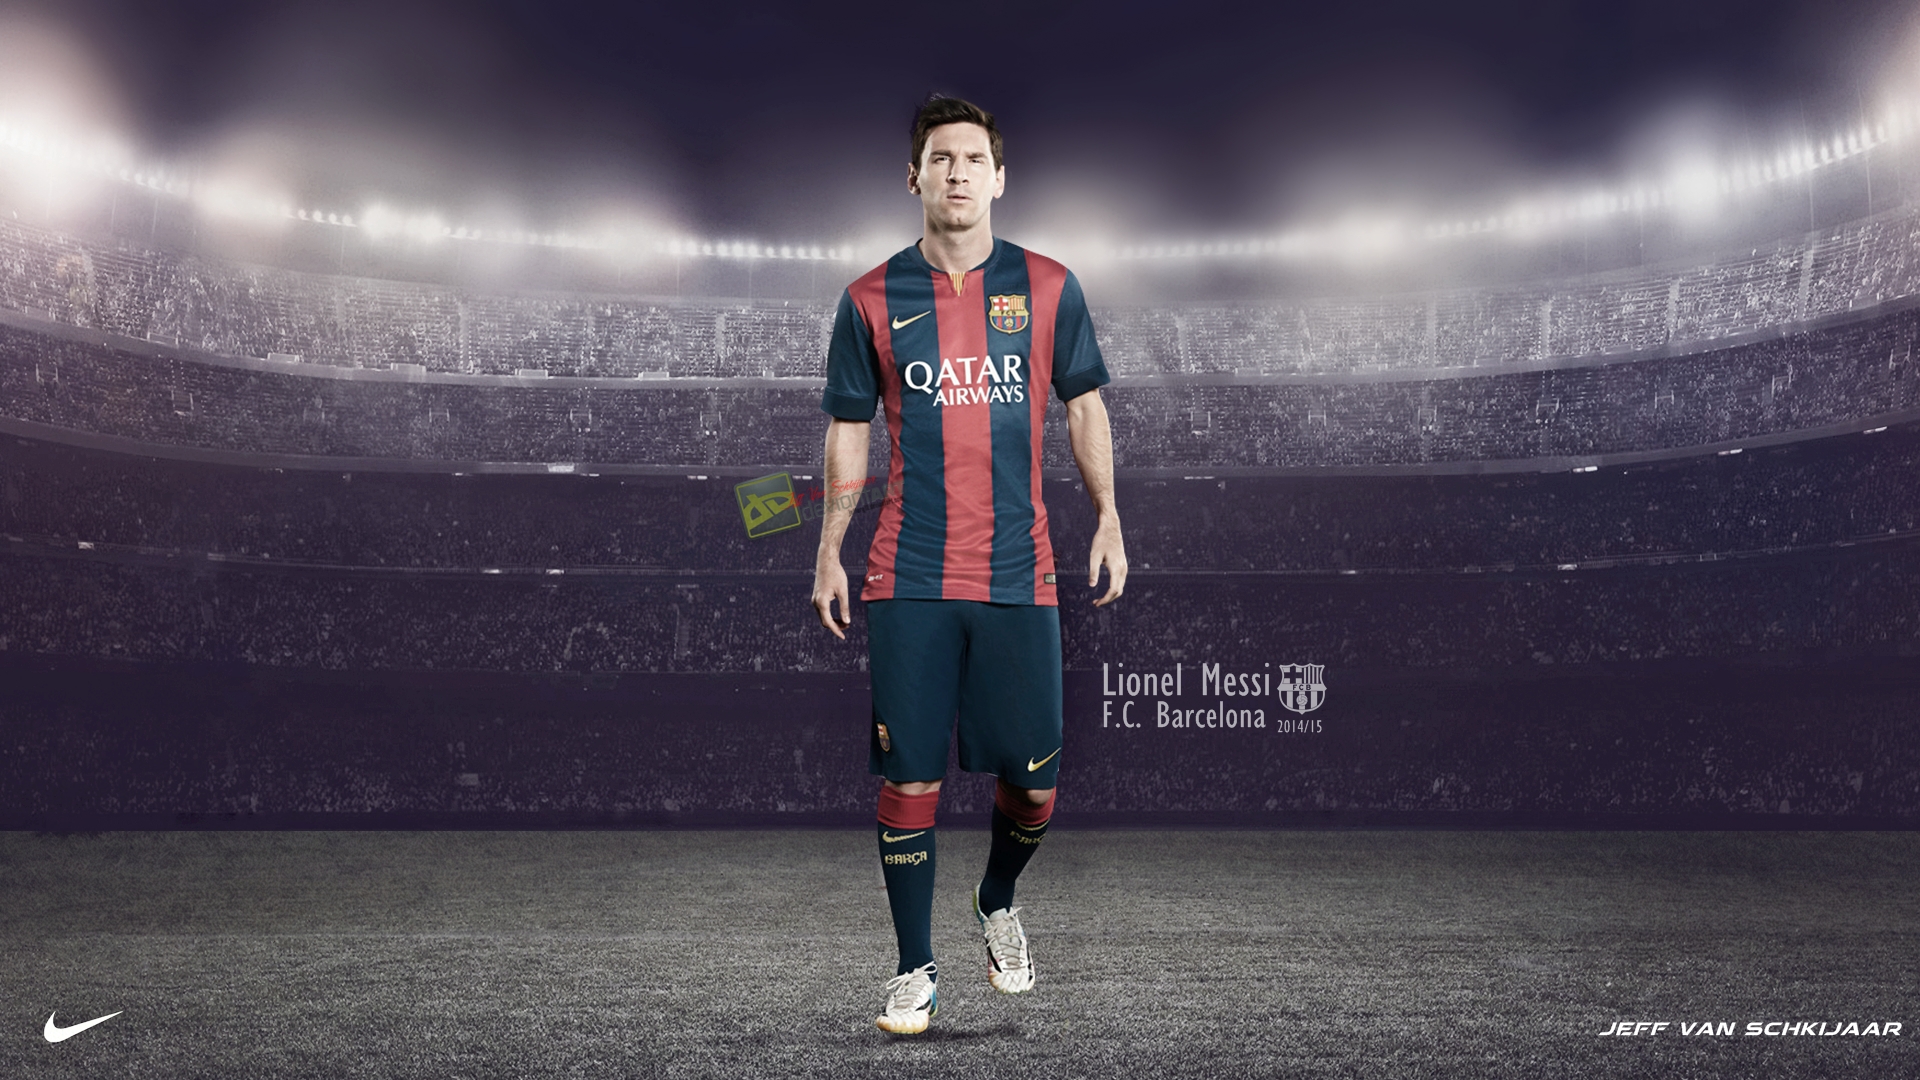 Messi FIFA 15 High Resolution wallpaper vector and designs